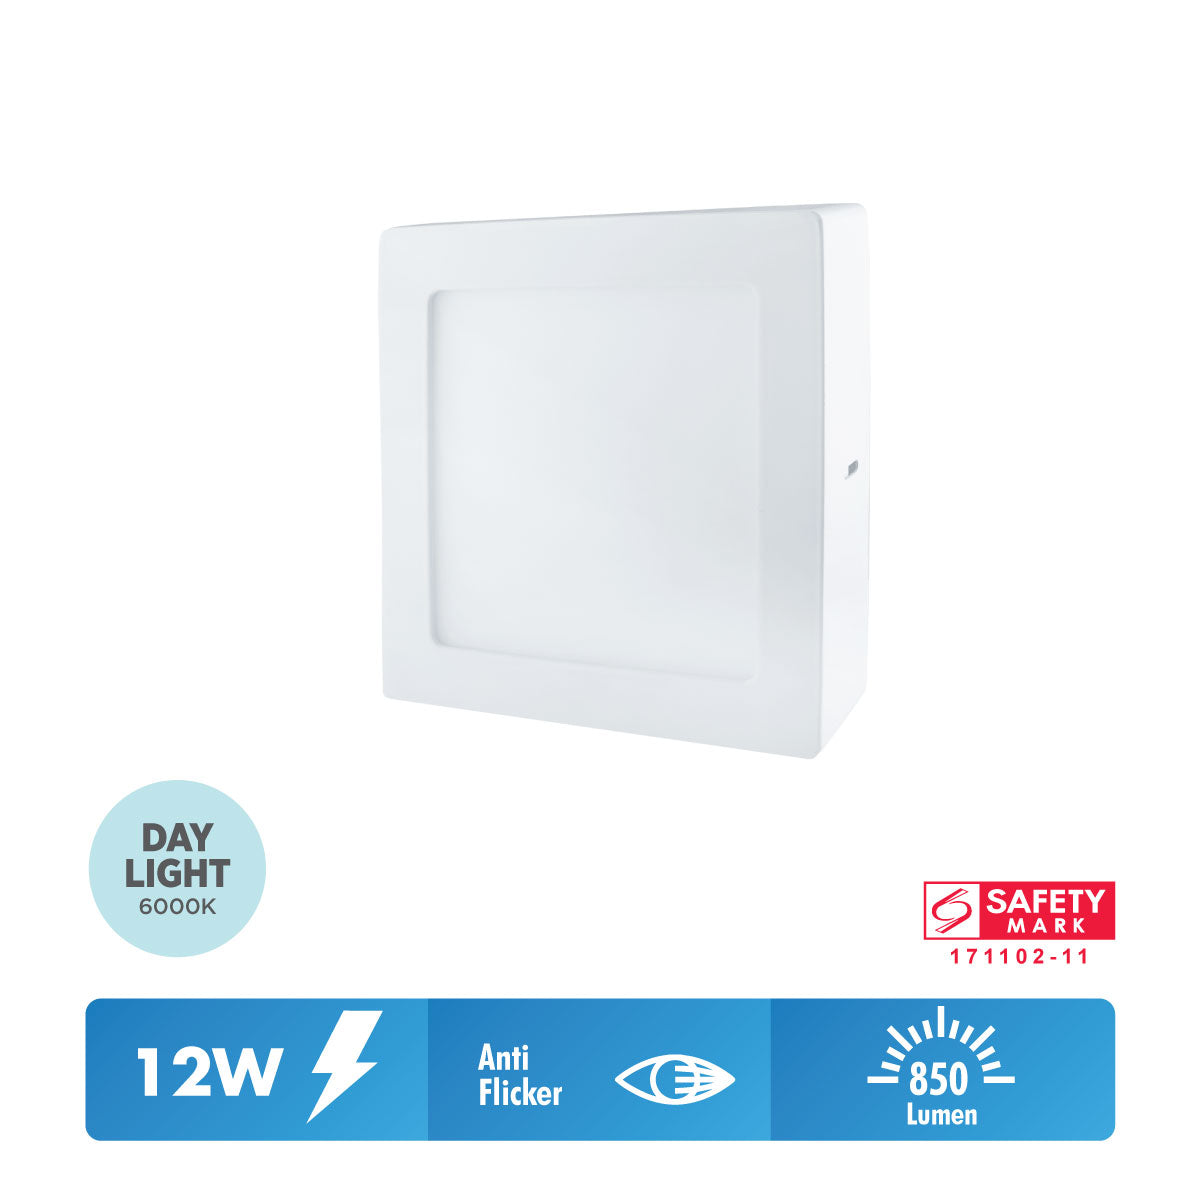 Daiyo LPS 75-DL 12W LED Surfaced Panel Light Square Shape (Day Light)